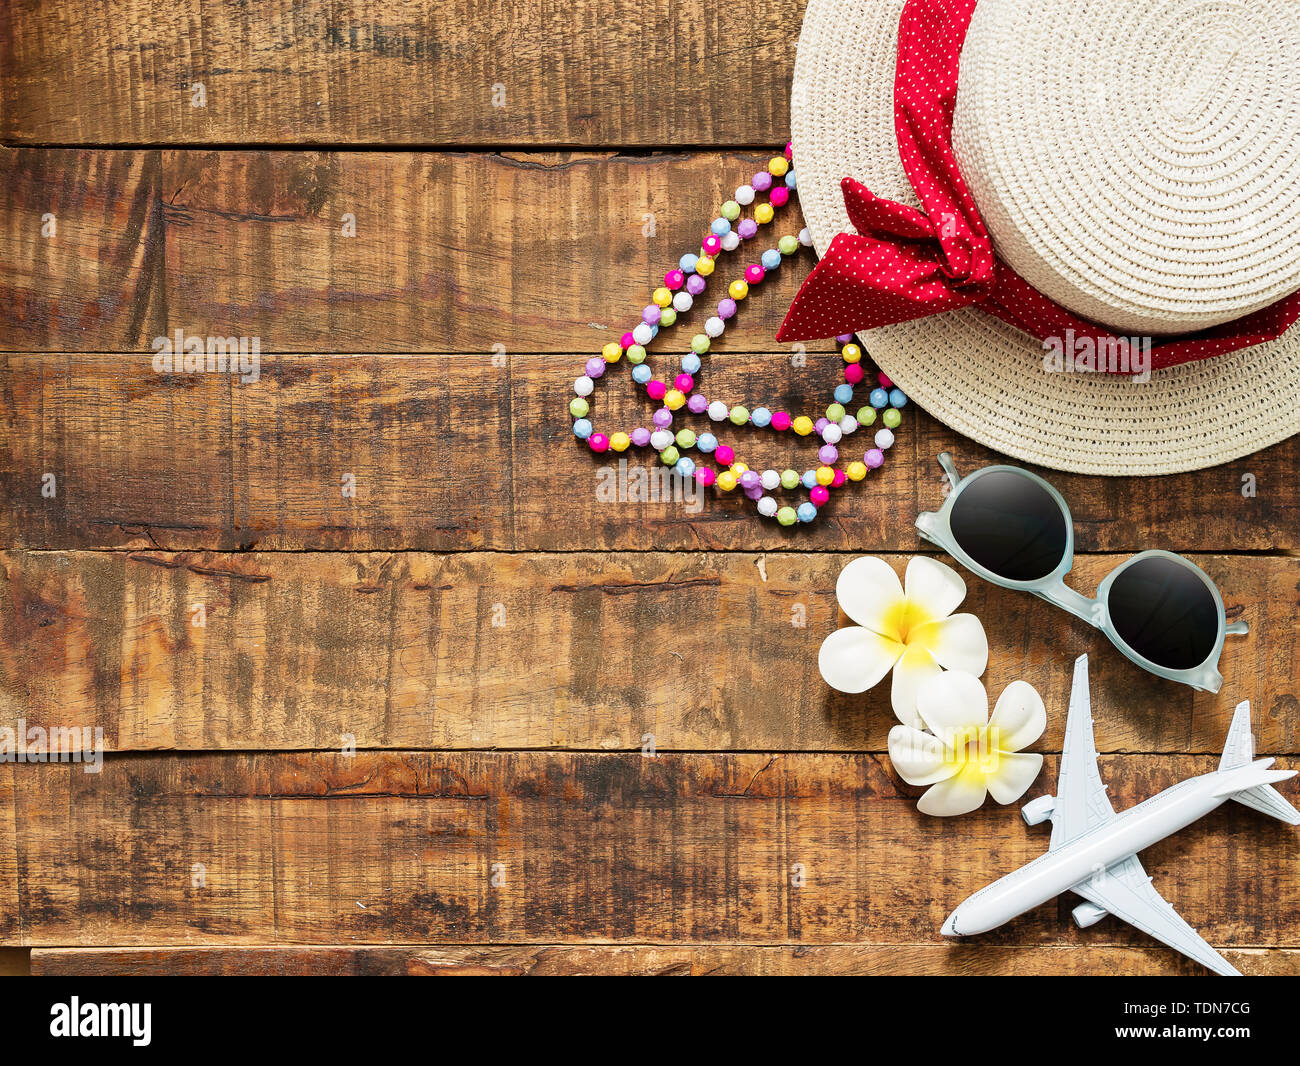 flat lay of hat , necklace , sun glass , flower and red heart shape as traveler's accessories items for summer vacation and plane model on wooden back Stock Photo